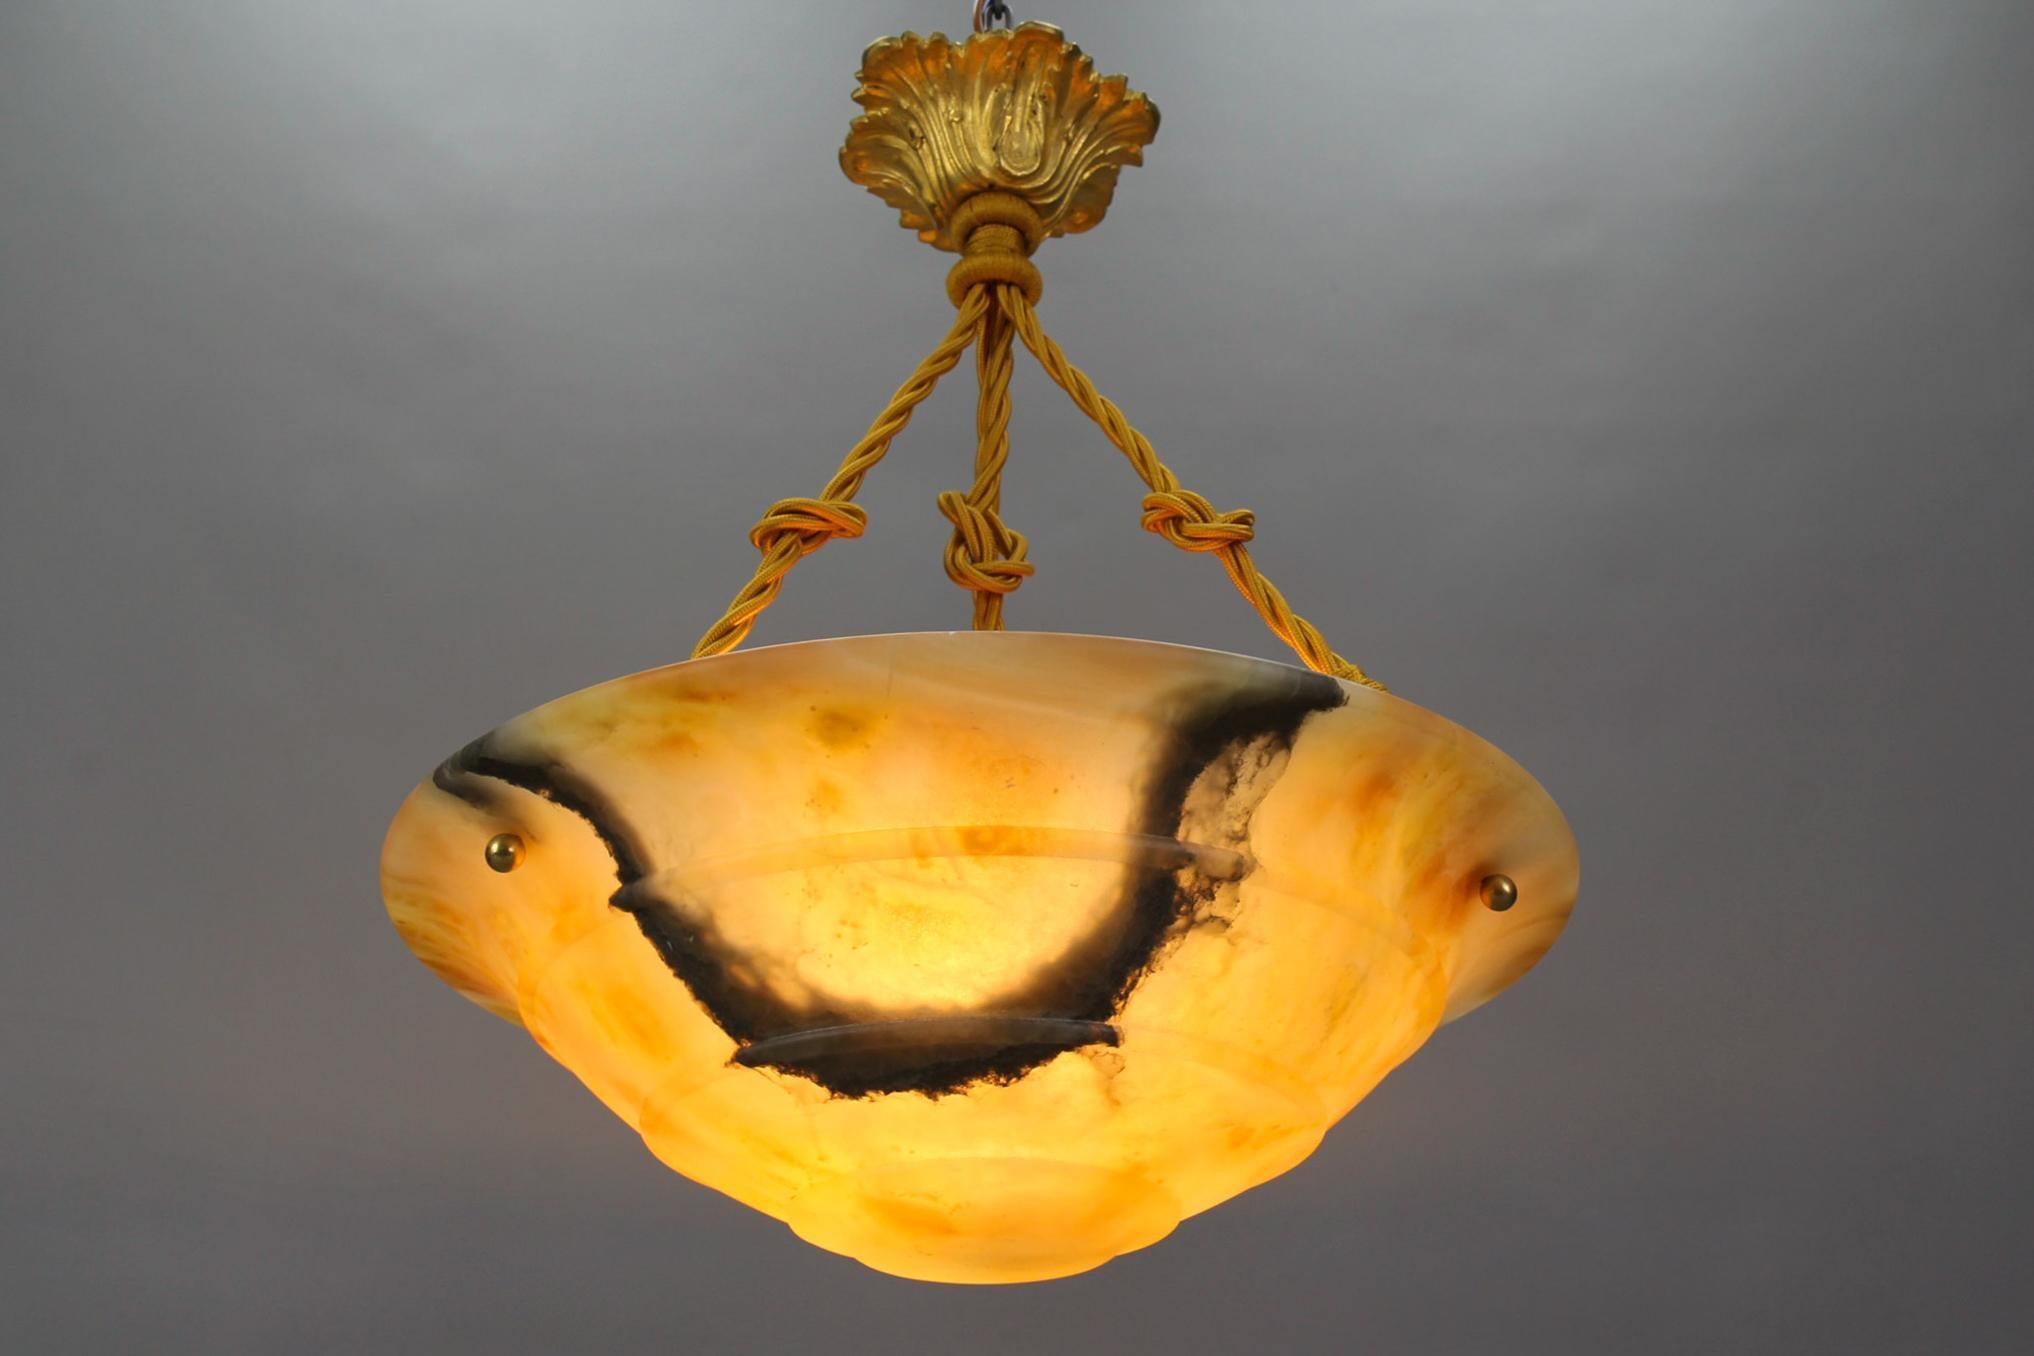 A magnificent Art Deco amber color alabaster pendant ceiling light fixture with black veins. Germany, circa the 1930s. 
This masterfully carved, layered, and beautifully veined alabaster bowl in amber tones is suspended by three ropes (wires) and a